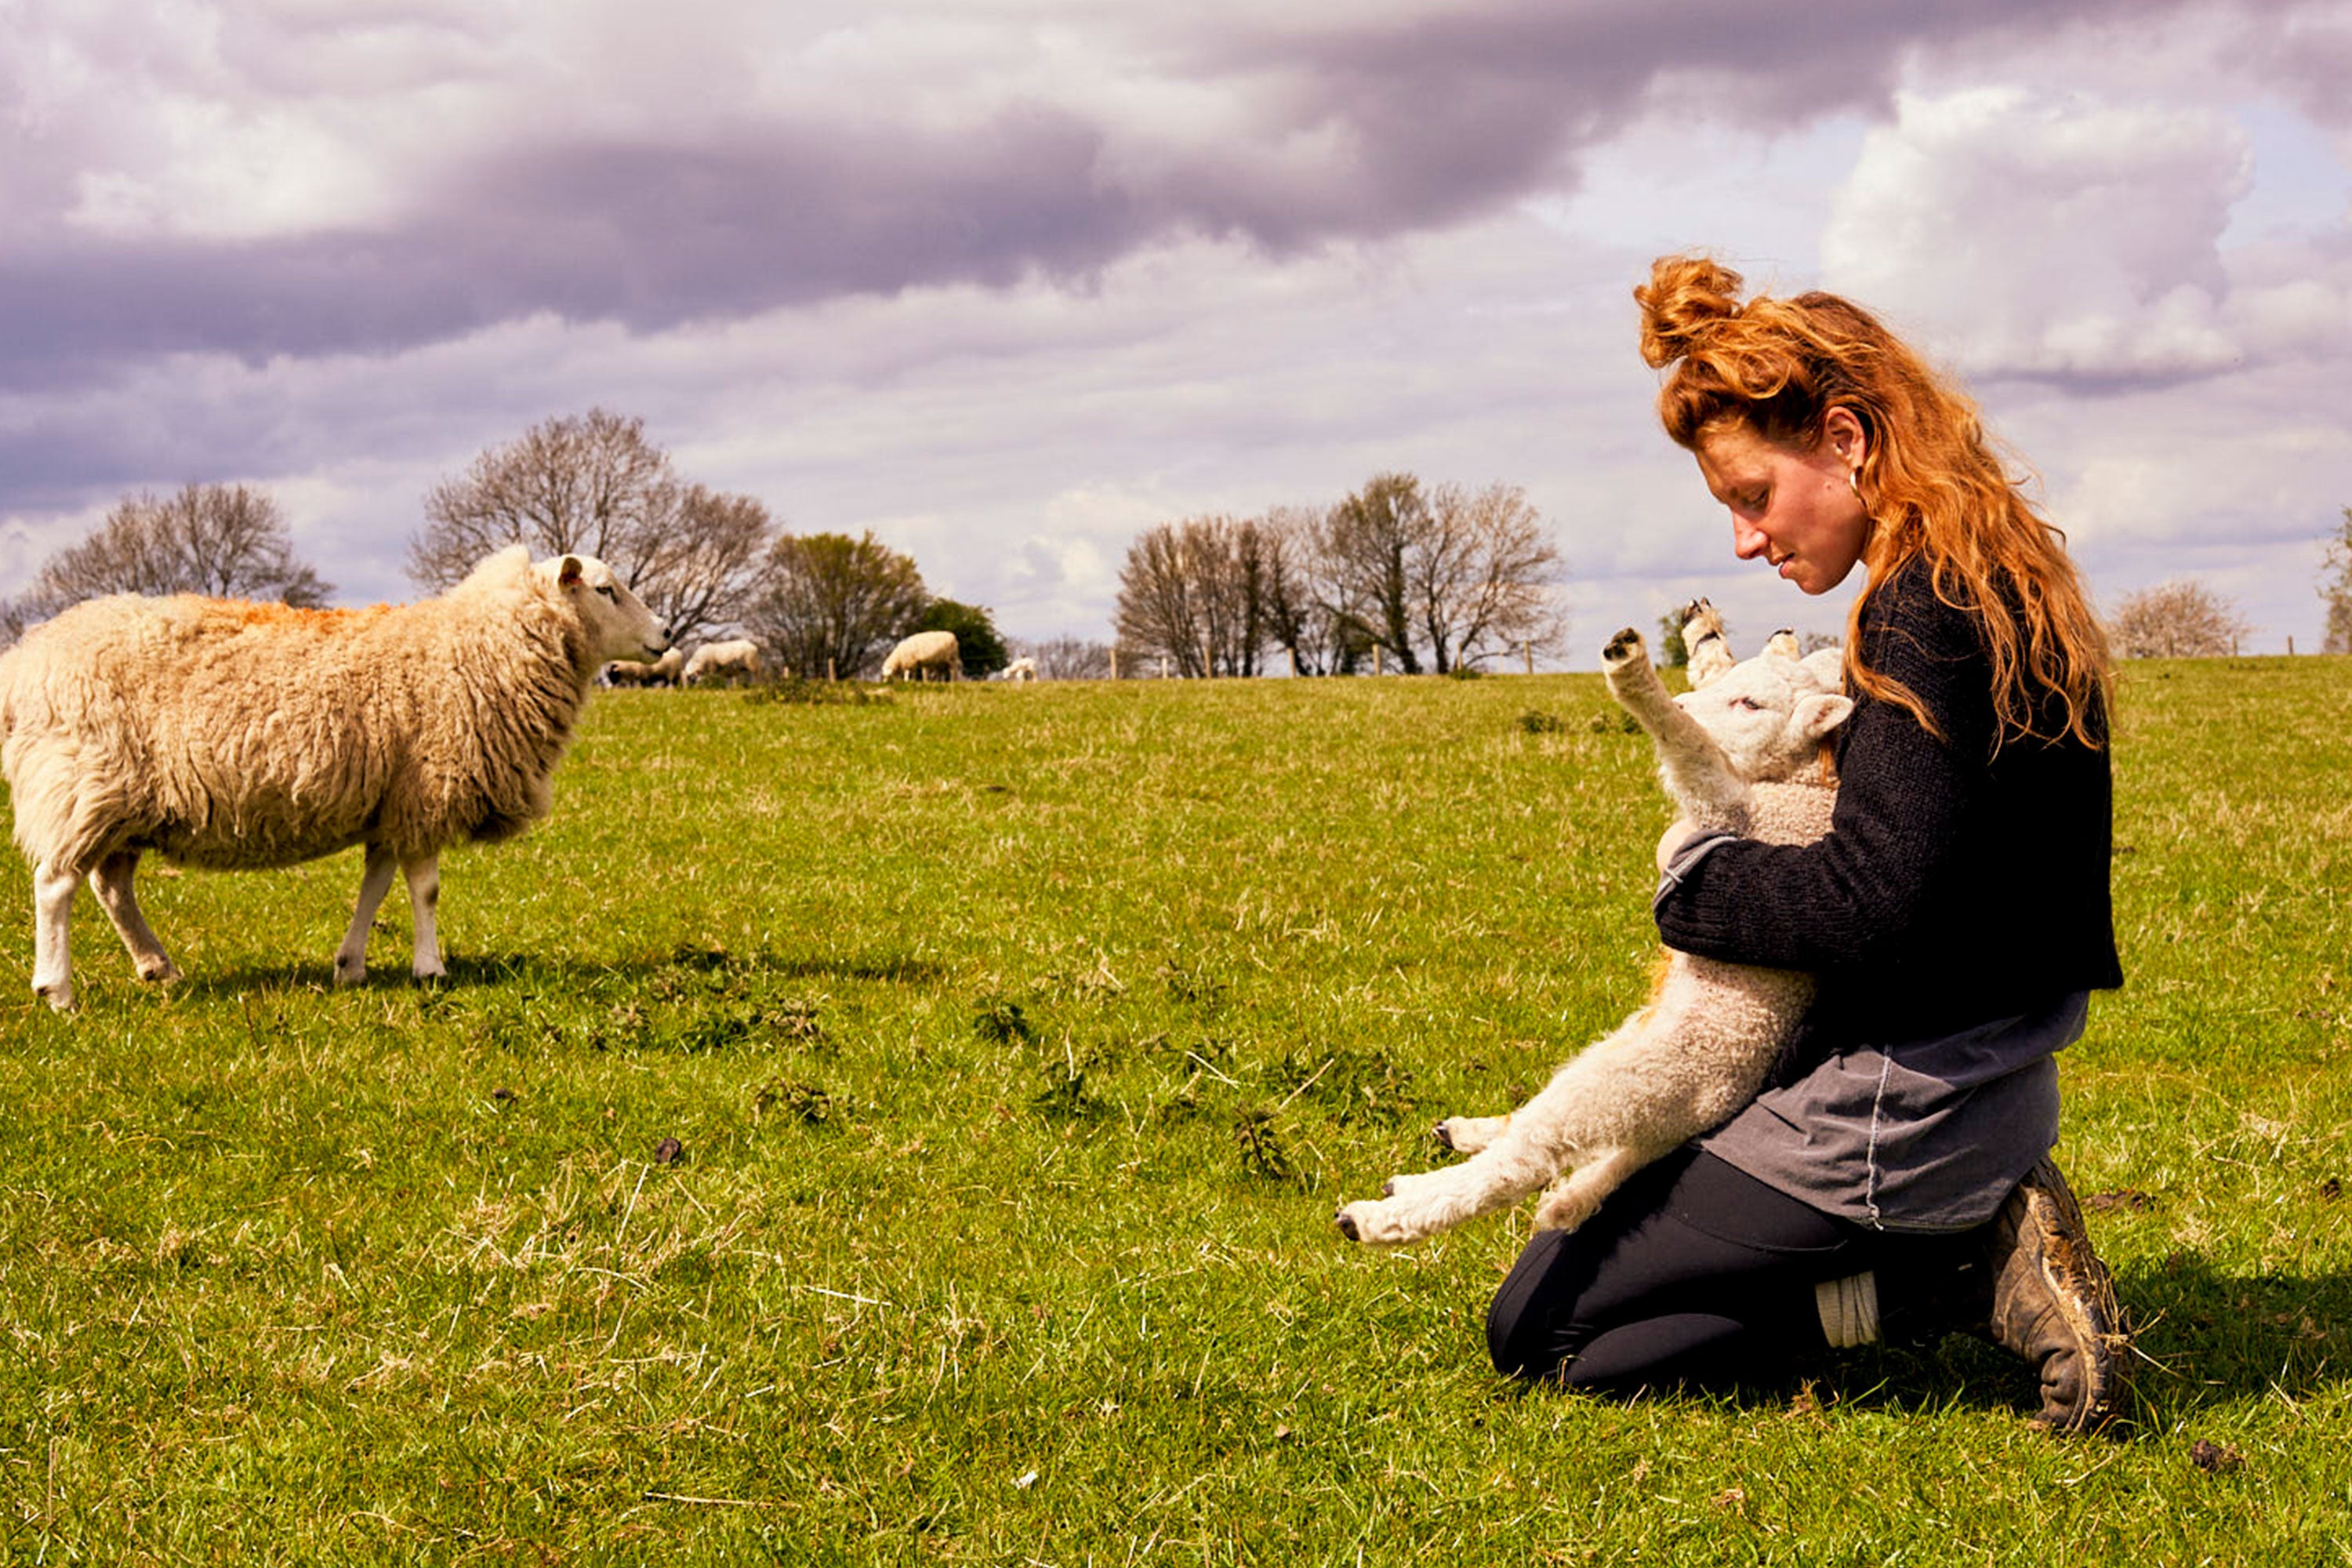 Zoe holding a lamb up against her.